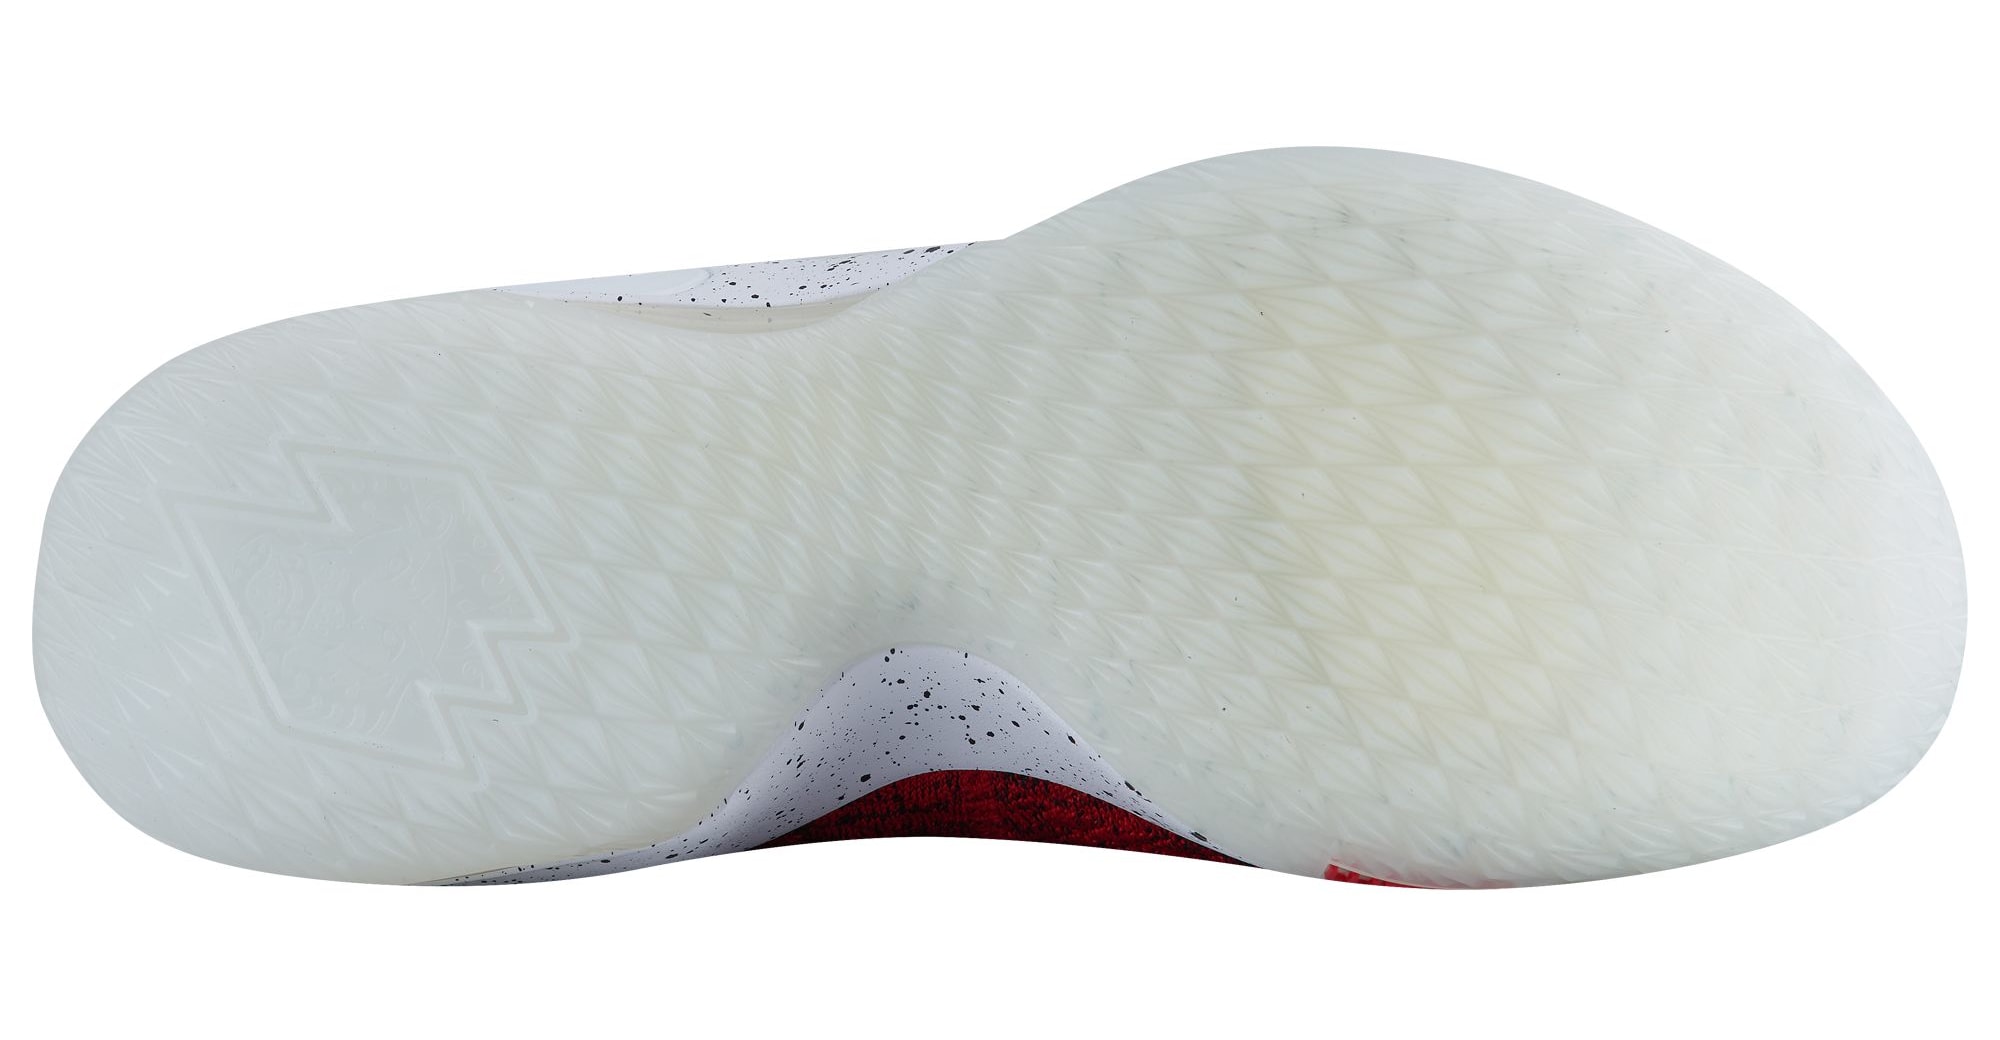 nike-lebron-15-low-university-red-ao1755-600-sole